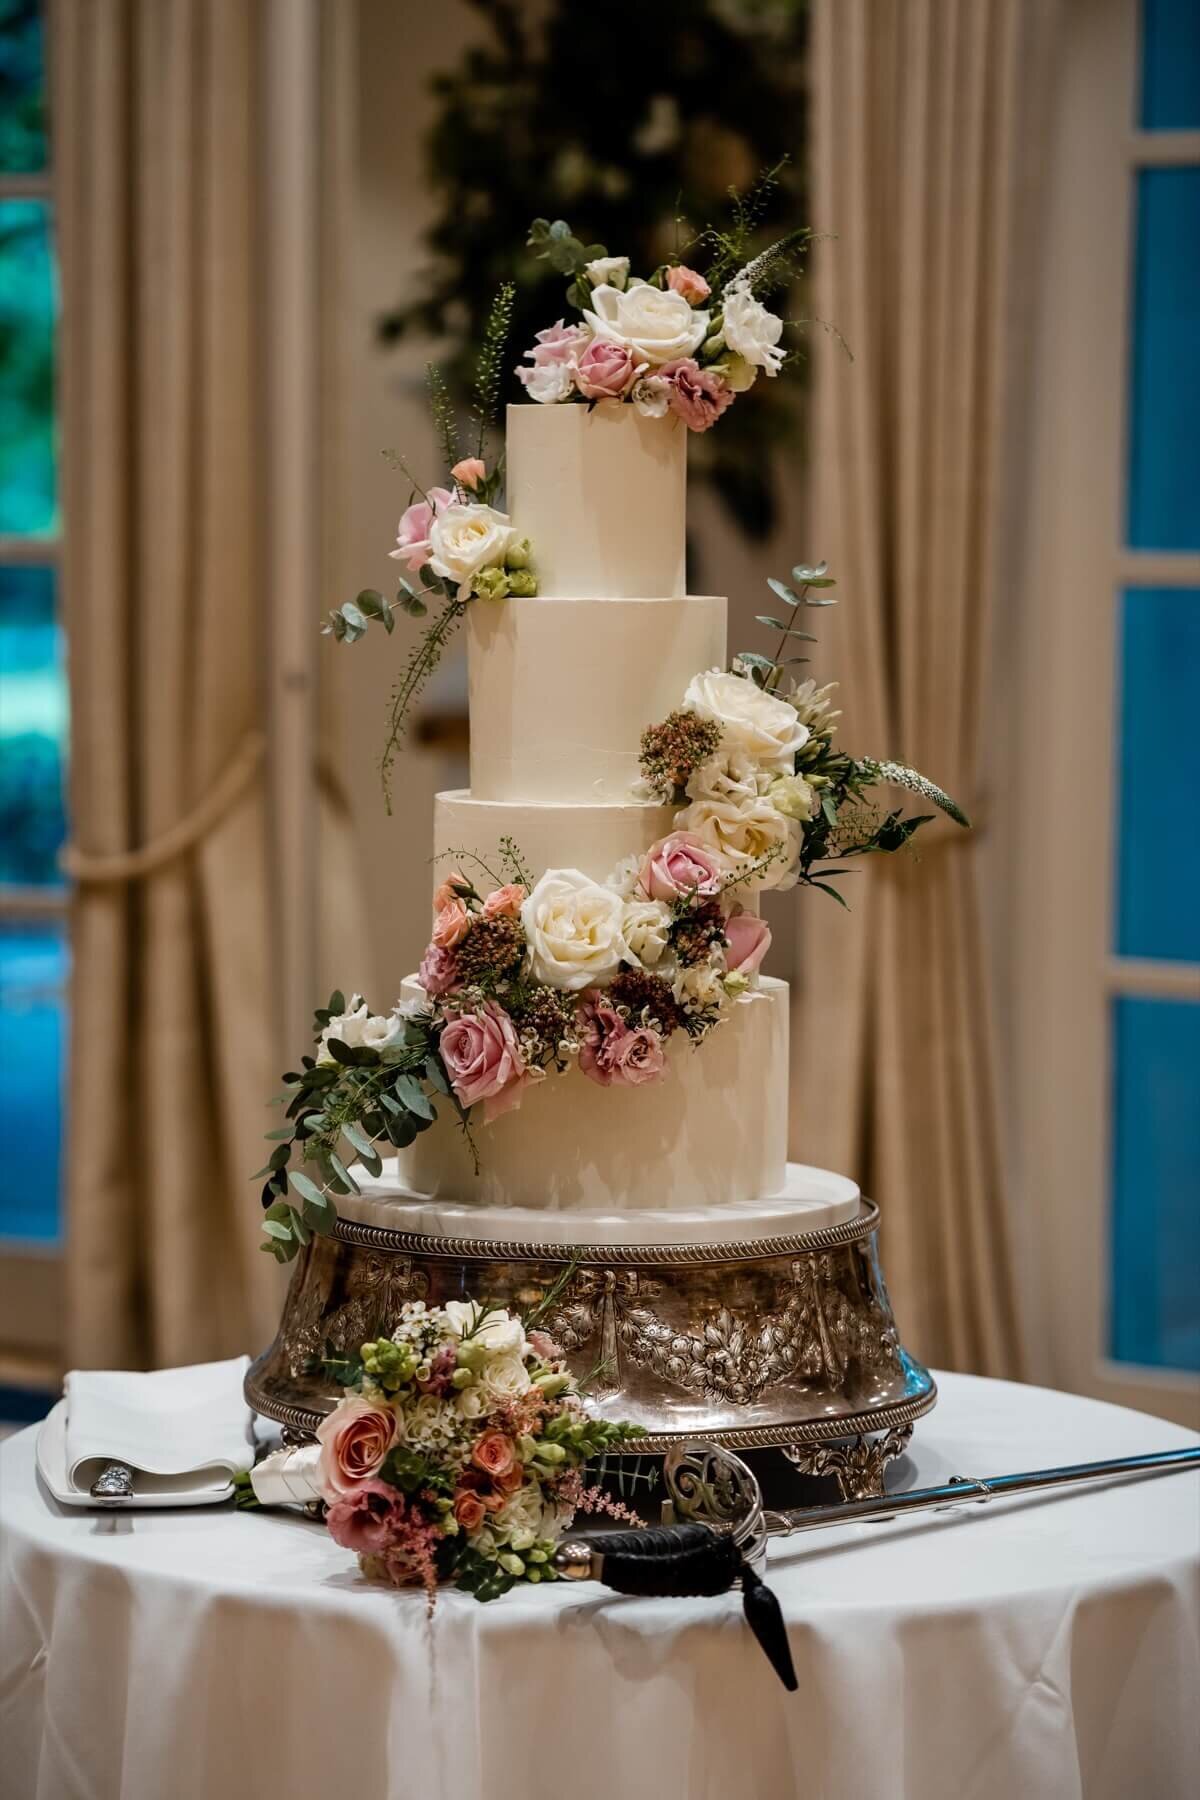 An elegant wedding cake with florals running diagonally down the cake on a silver cake stand with a sword sitting on the cake table